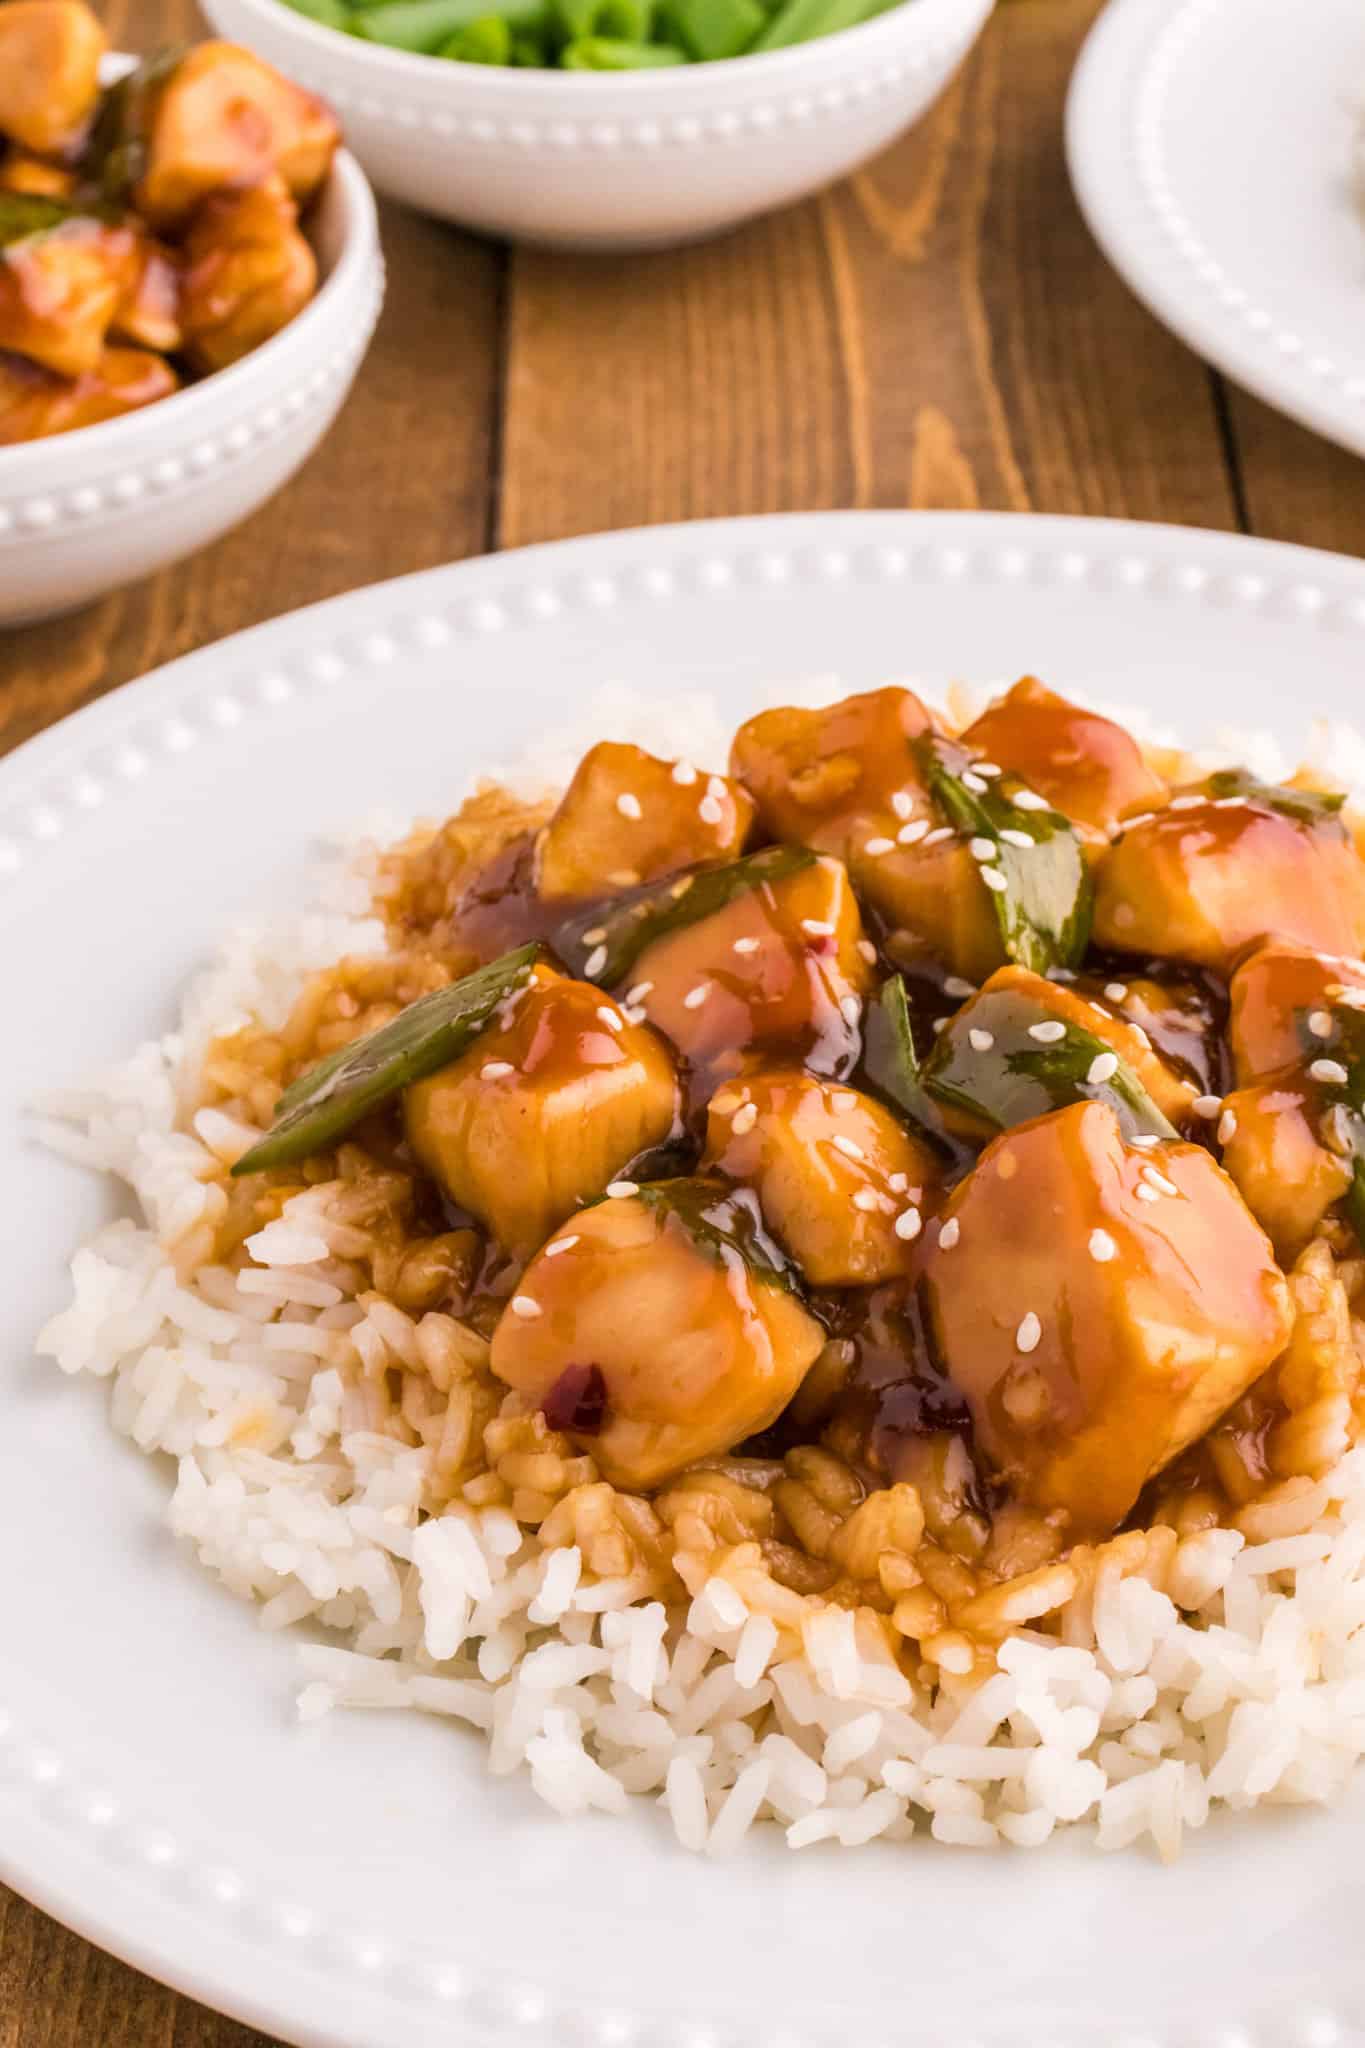 Mongolian Chicken is an easy chicken dish made with diced chicken breast chunks cooked in a sweet and savory sauce made with soy sauce, brown sugar, honey, ginger, garlic and with a bit of a kick from red pepper flakes.